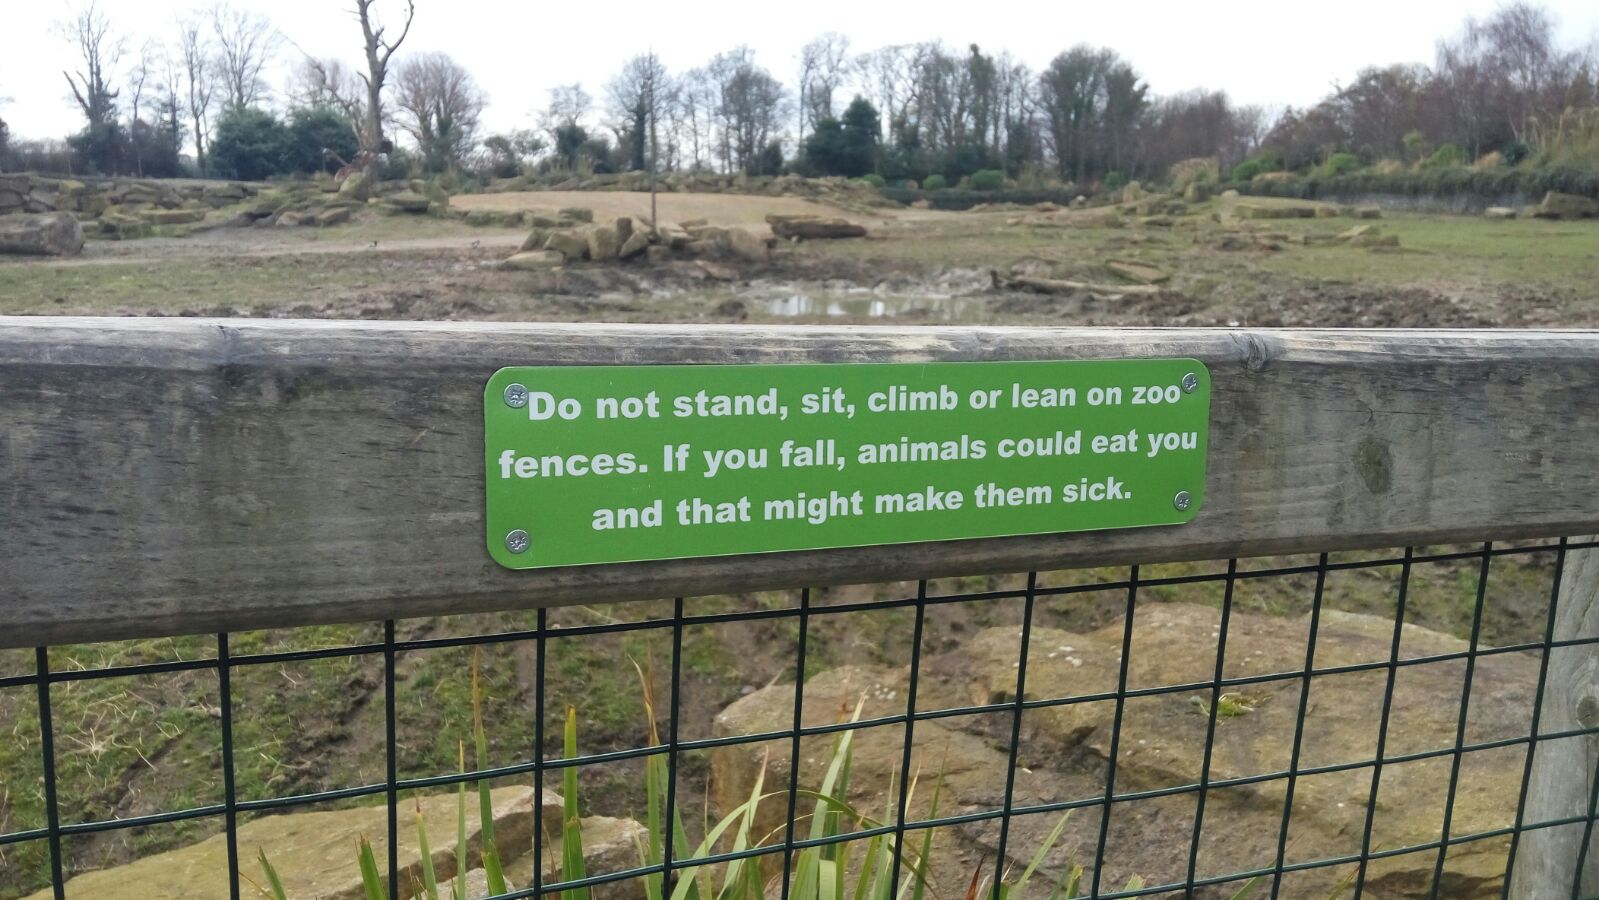 nature reserve - Do not stand, sit, climb or lean on zoo fences. If you fall, animals could eat you and that might make them sick.